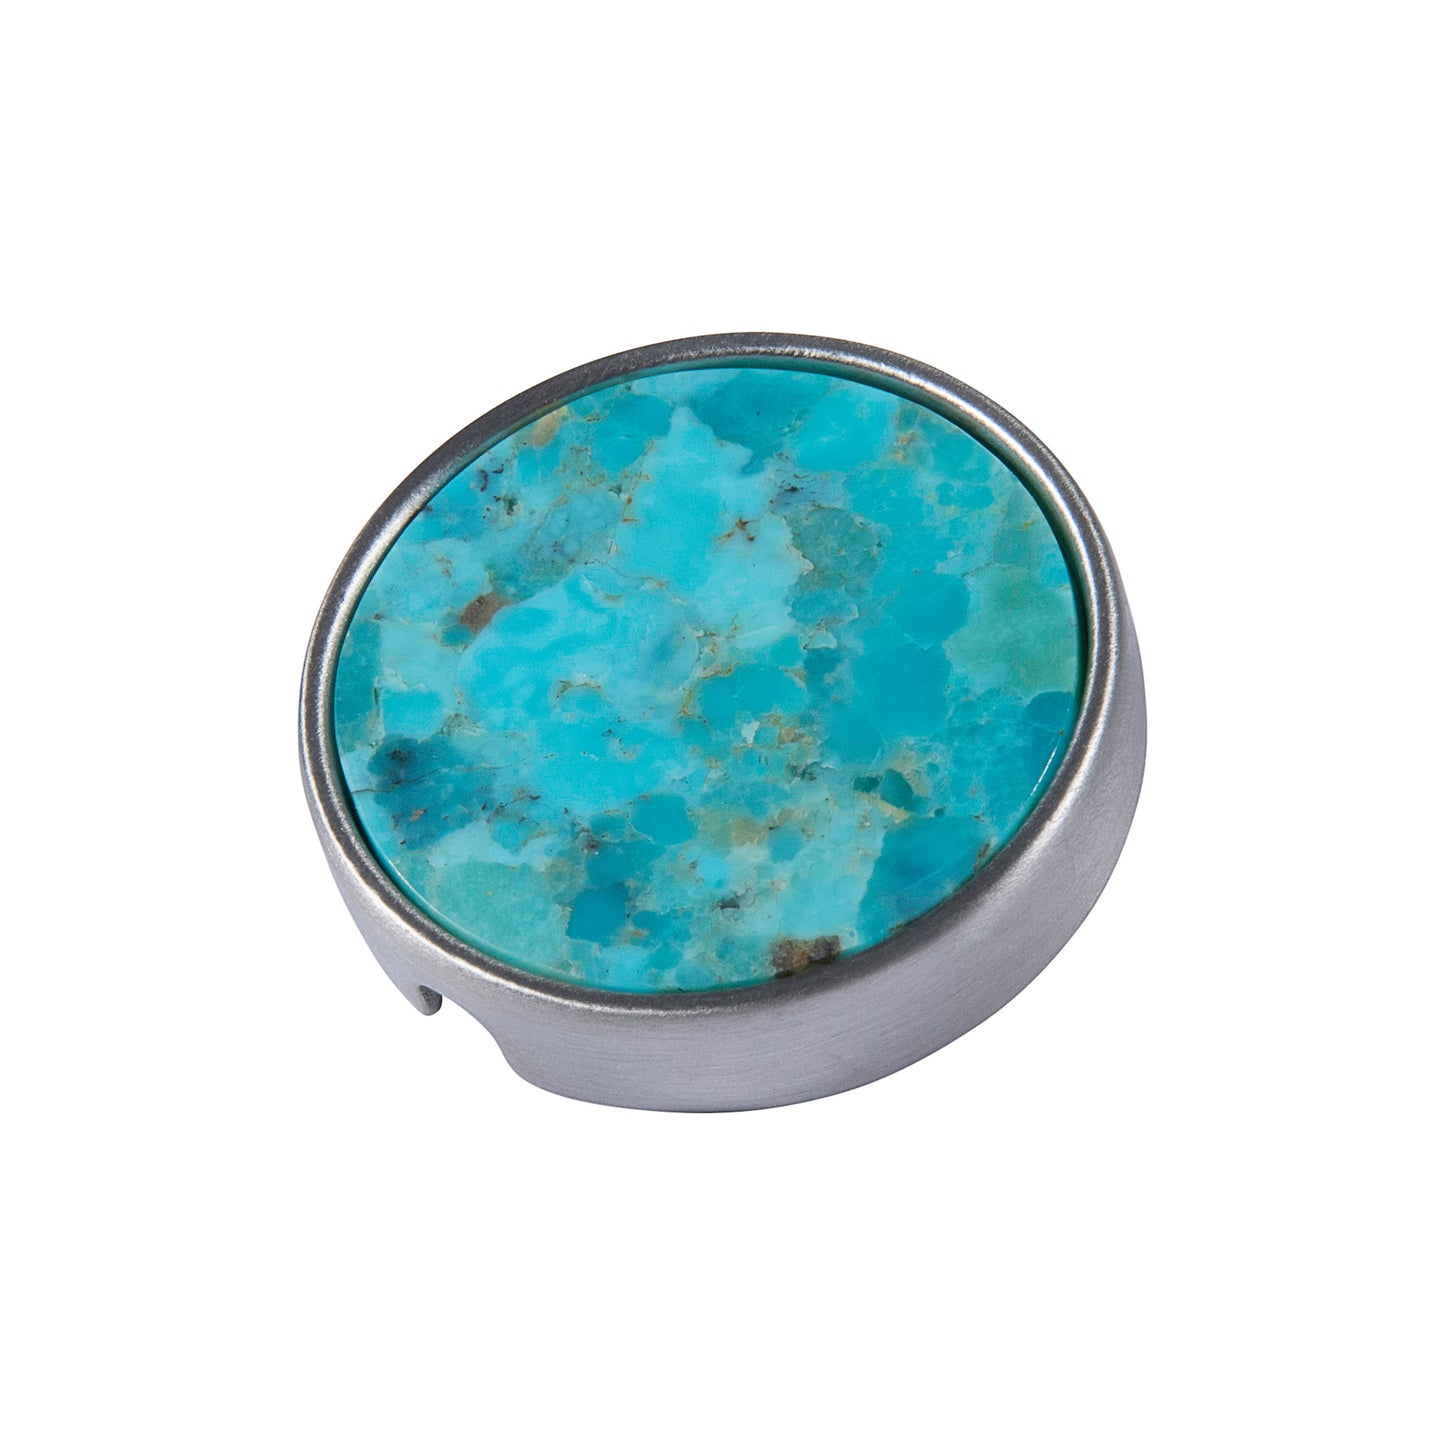 21mm button in brushed silver metal and Arizona turquoise